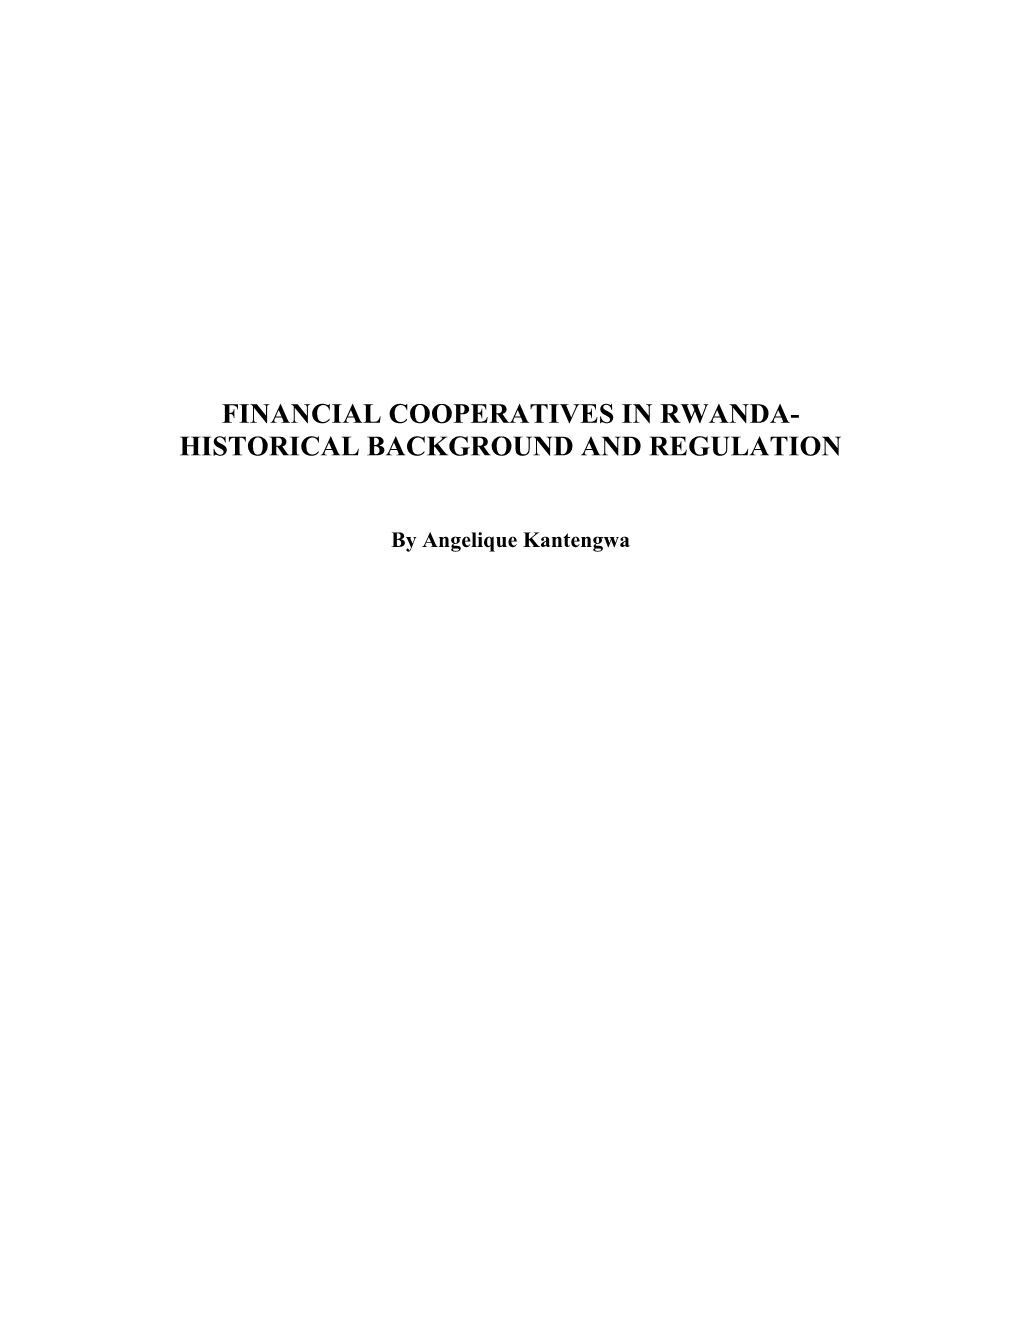 Financial Cooperatives in Rwanda- Historical Background and Regulation